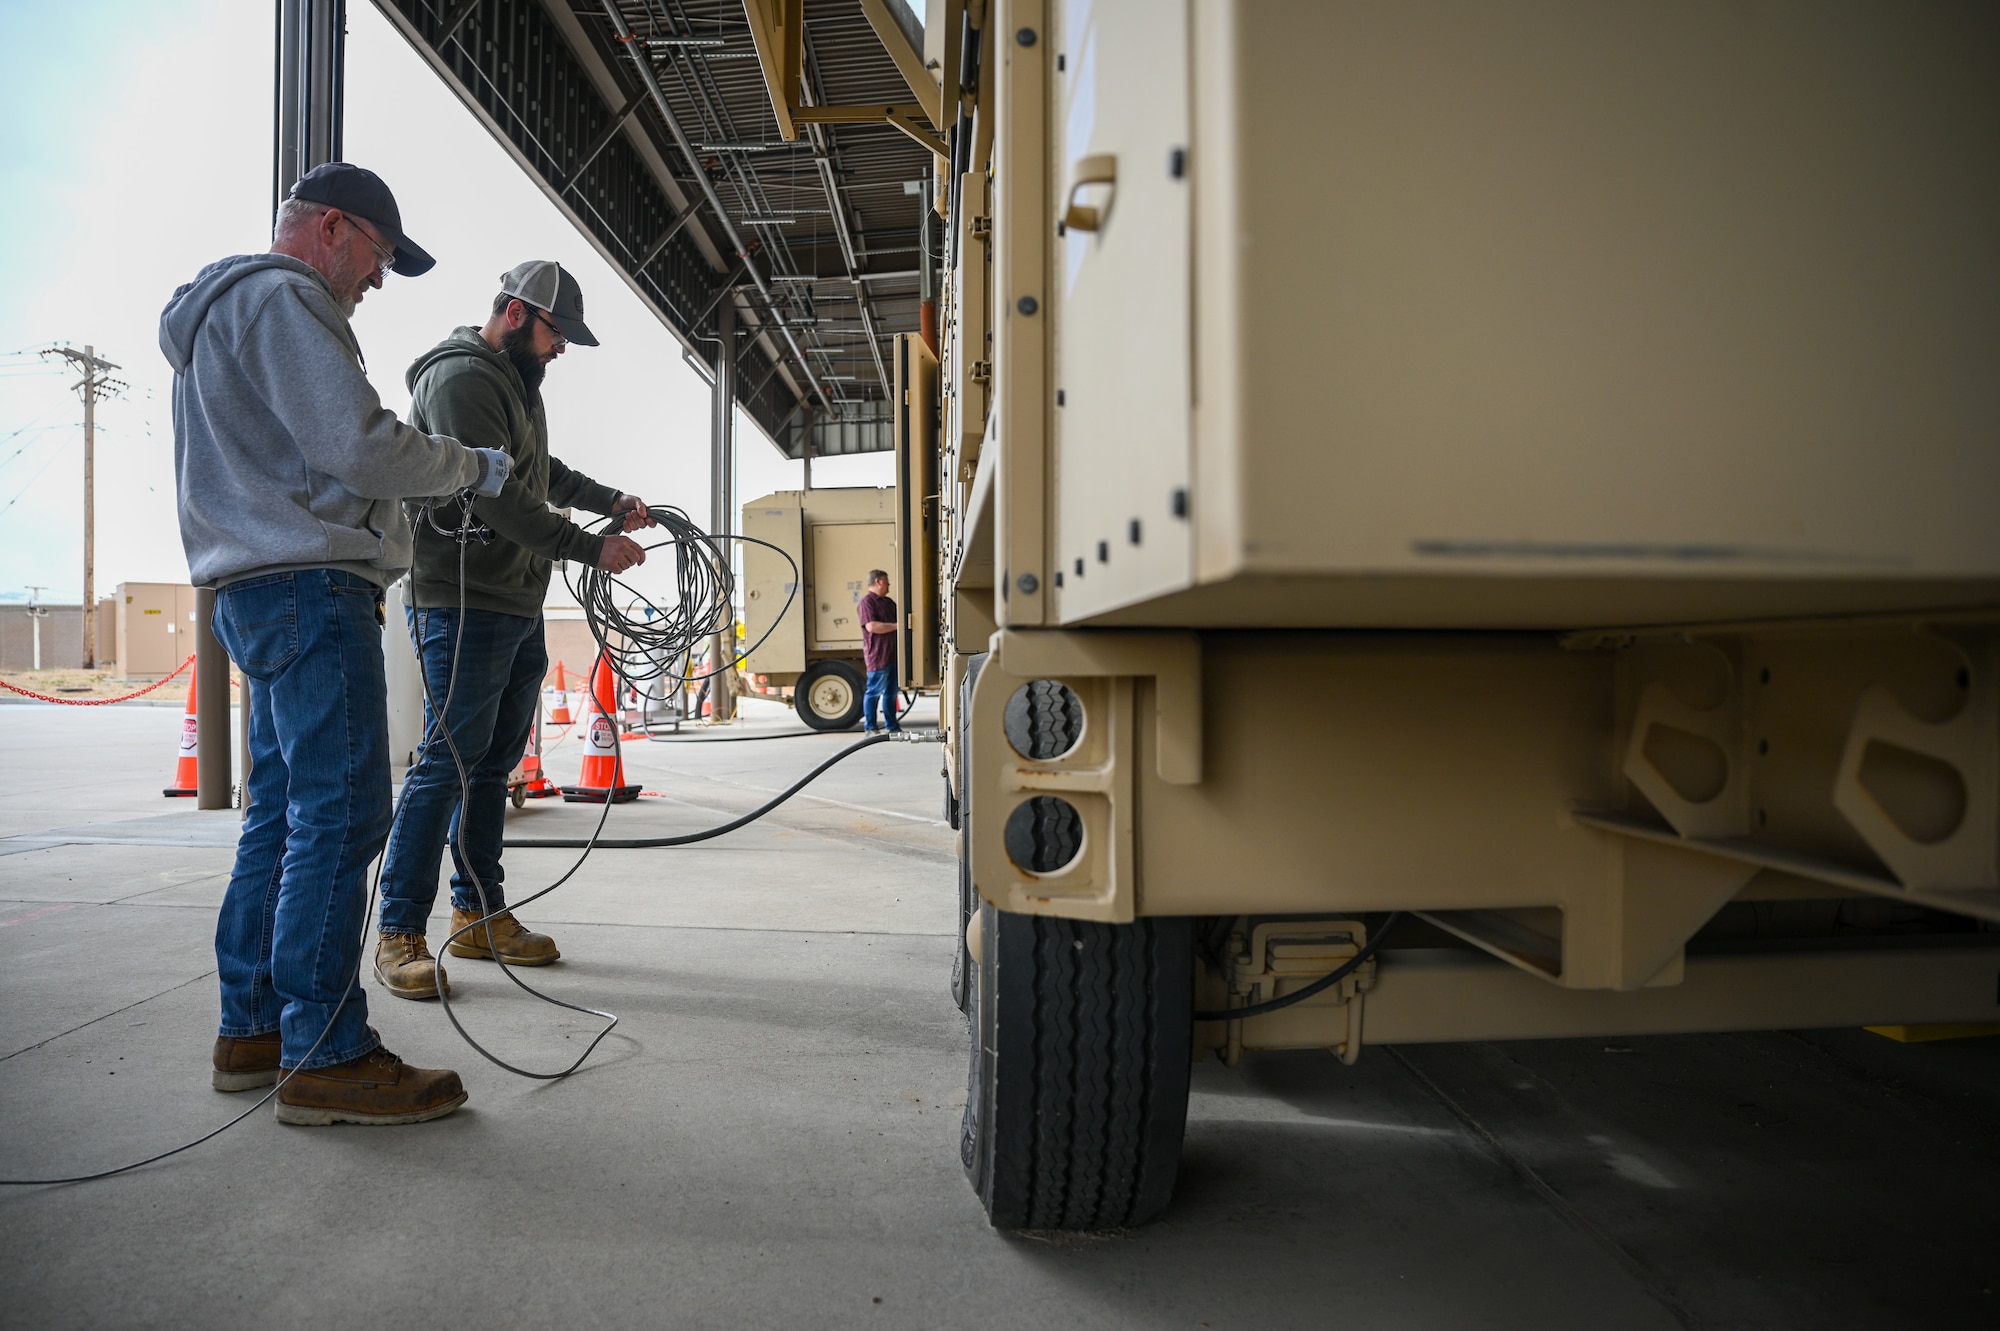 Left, Paul Williams and Abe Erwin, 526th Electronics Maintenance Squadron, prepare a Base Expeditionary Airfield Resources (BEAR) power unit for testing at Hill Air Force Base, Utah, April 26, 2022. The 526th EMXS activated a new maintenance workload on BEAR units after successfully testing the unit's first repaired asset. BEAR power units are used to power U.S. Air Force forward operating bases. (U.S. Air Force photo by R. Nial Bradshaw)